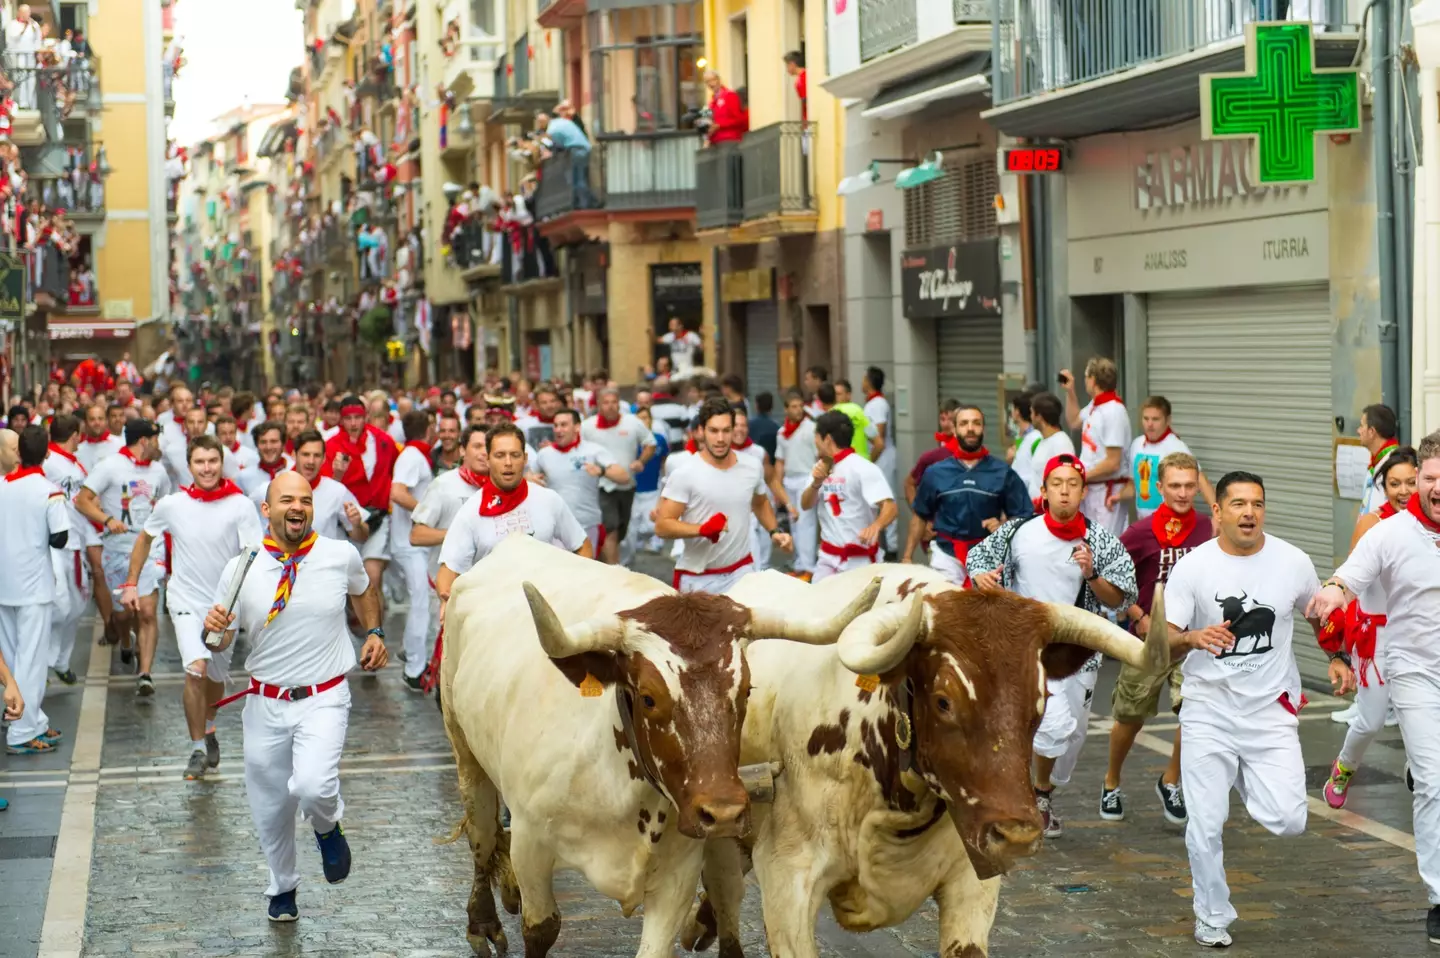 Thousands travel to Spain every year to take part in bull running events.